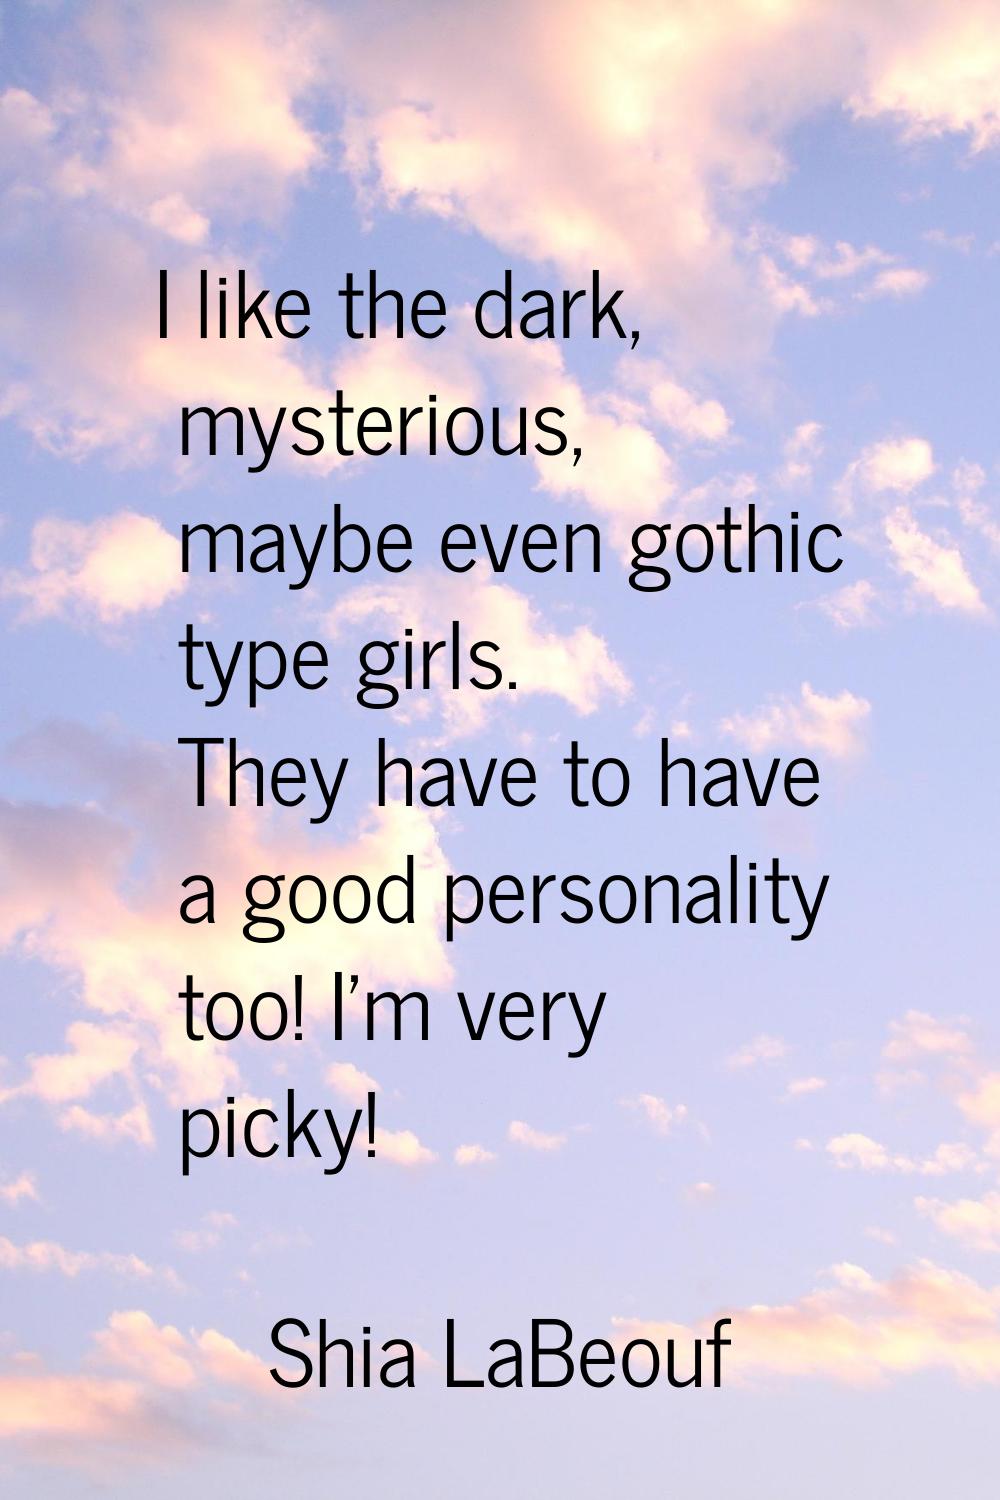 I like the dark, mysterious, maybe even gothic type girls. They have to have a good personality too